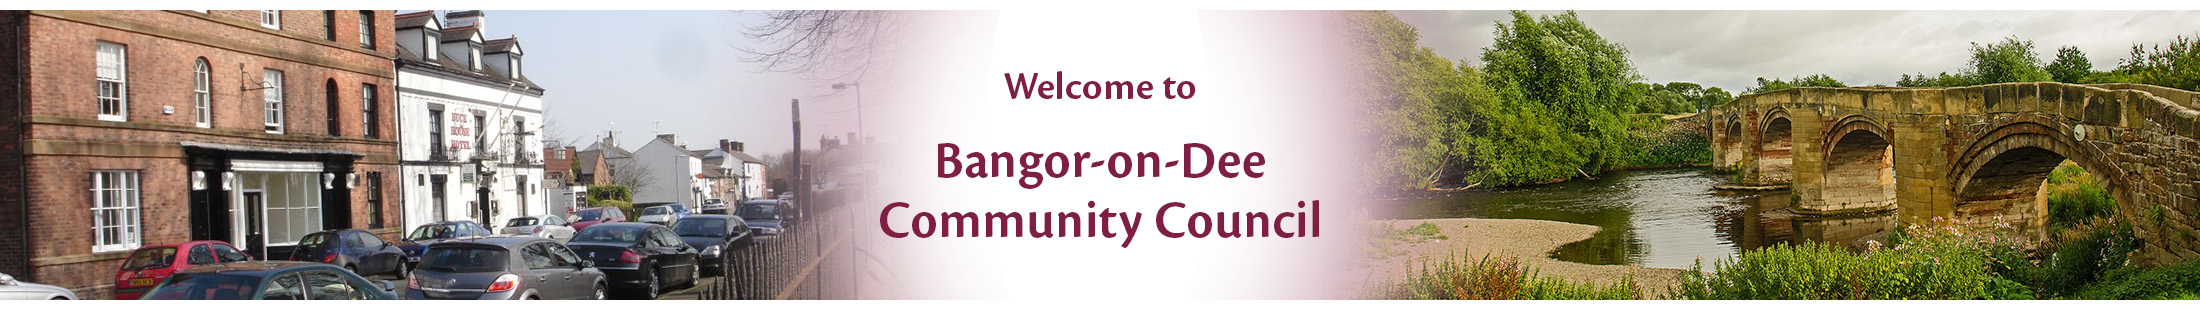 Header Image for Bangor on Dee Community Council